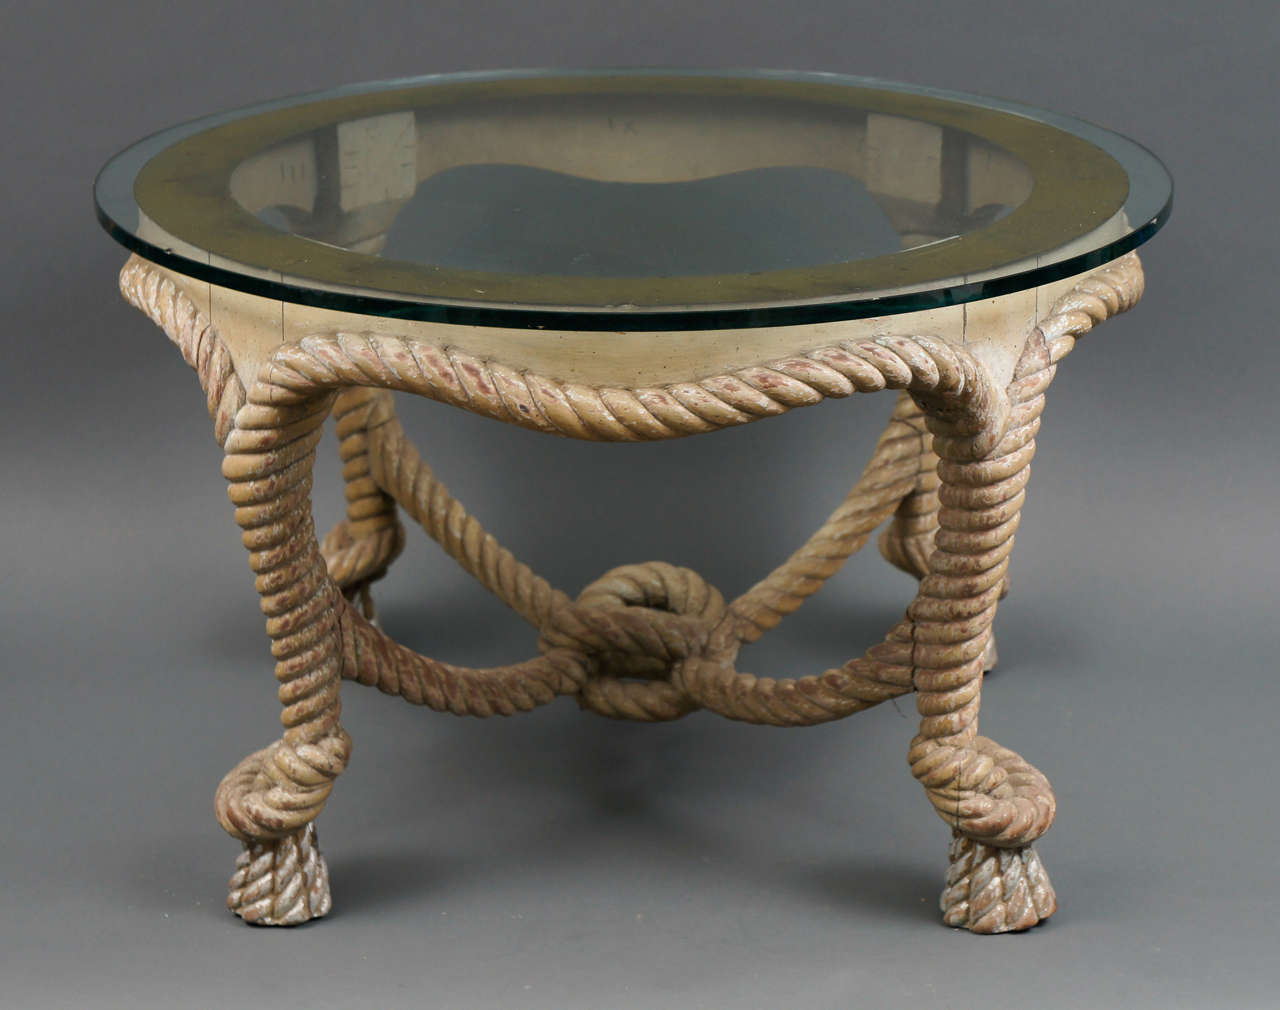 Carved Rope Table with Glass Top.

Pick Up Location:
Naga North
536 Warren Street 
Hudson, NY 12534
(518)828-8585